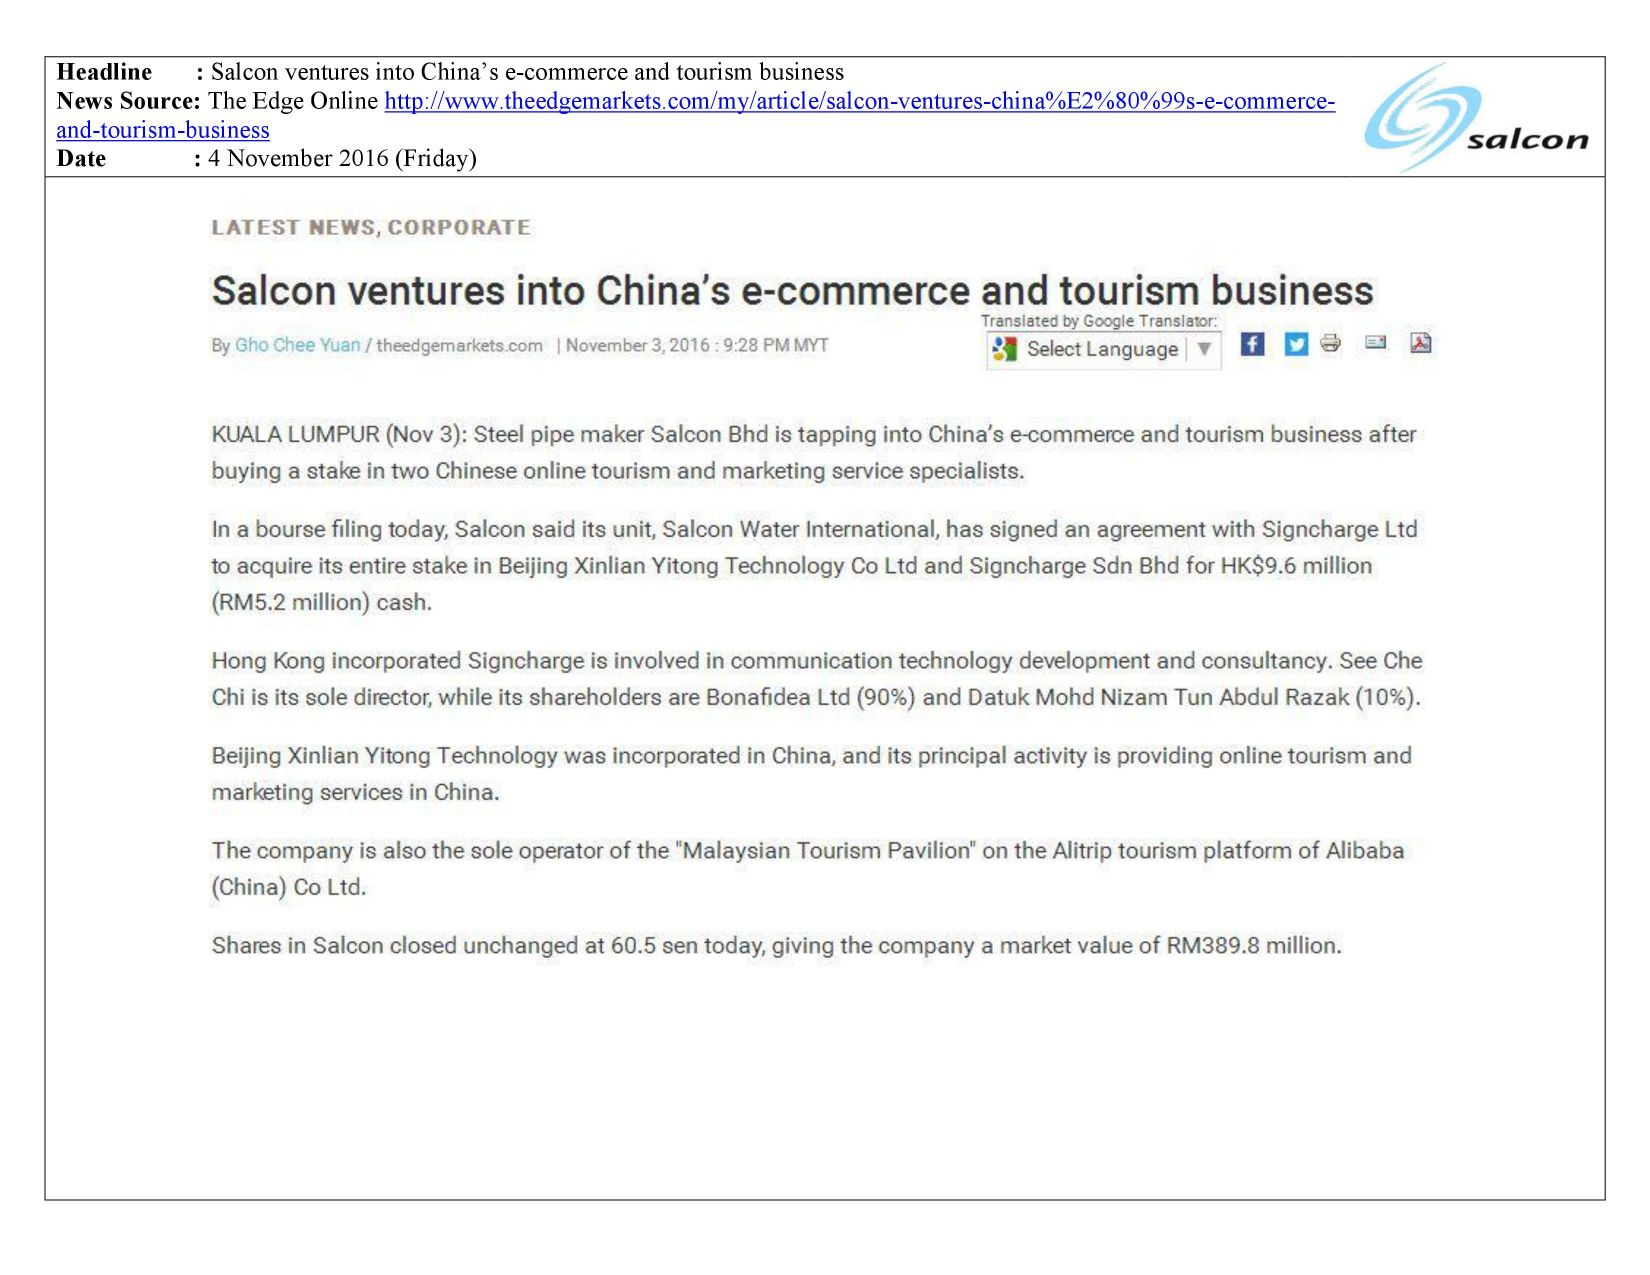 Salcon ventures into China’s e-commerce and tourism business